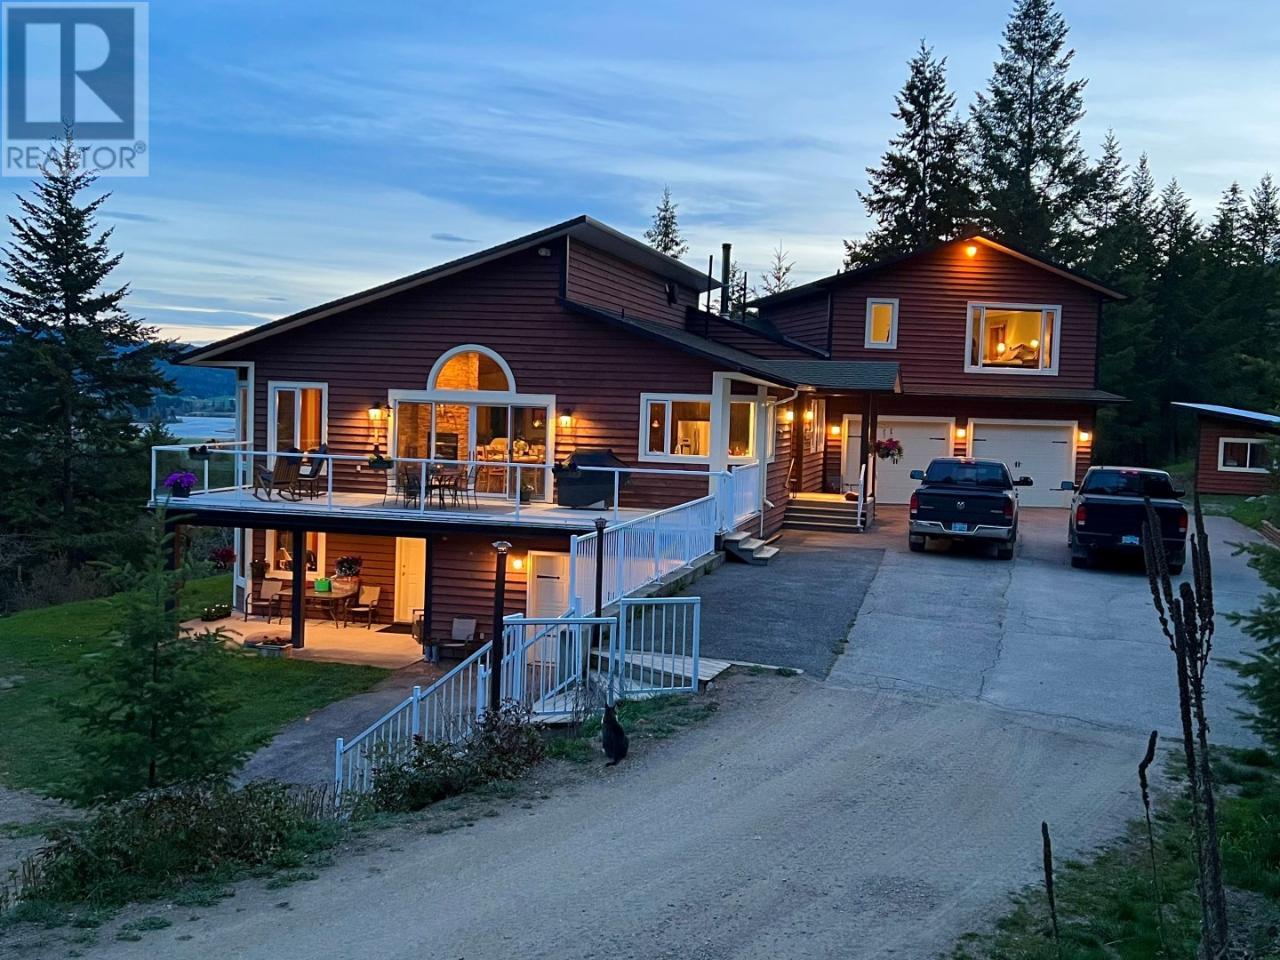 600 BAILEY RD located in Chase, British Columbia